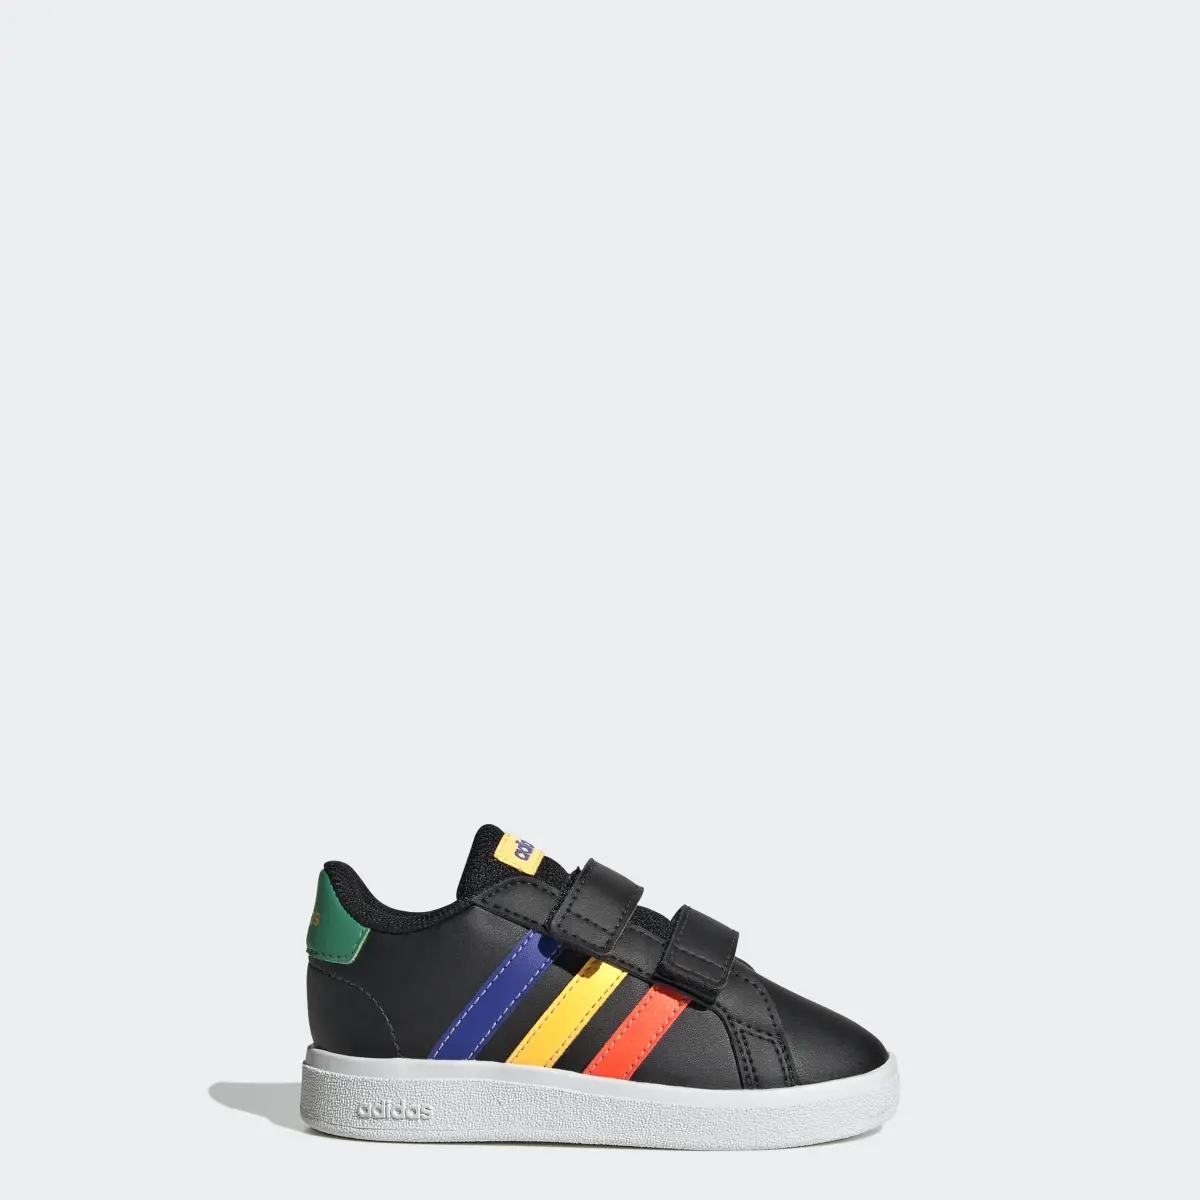 Adidas Grand Court Lifestyle Hook and Loop Shoes. 1